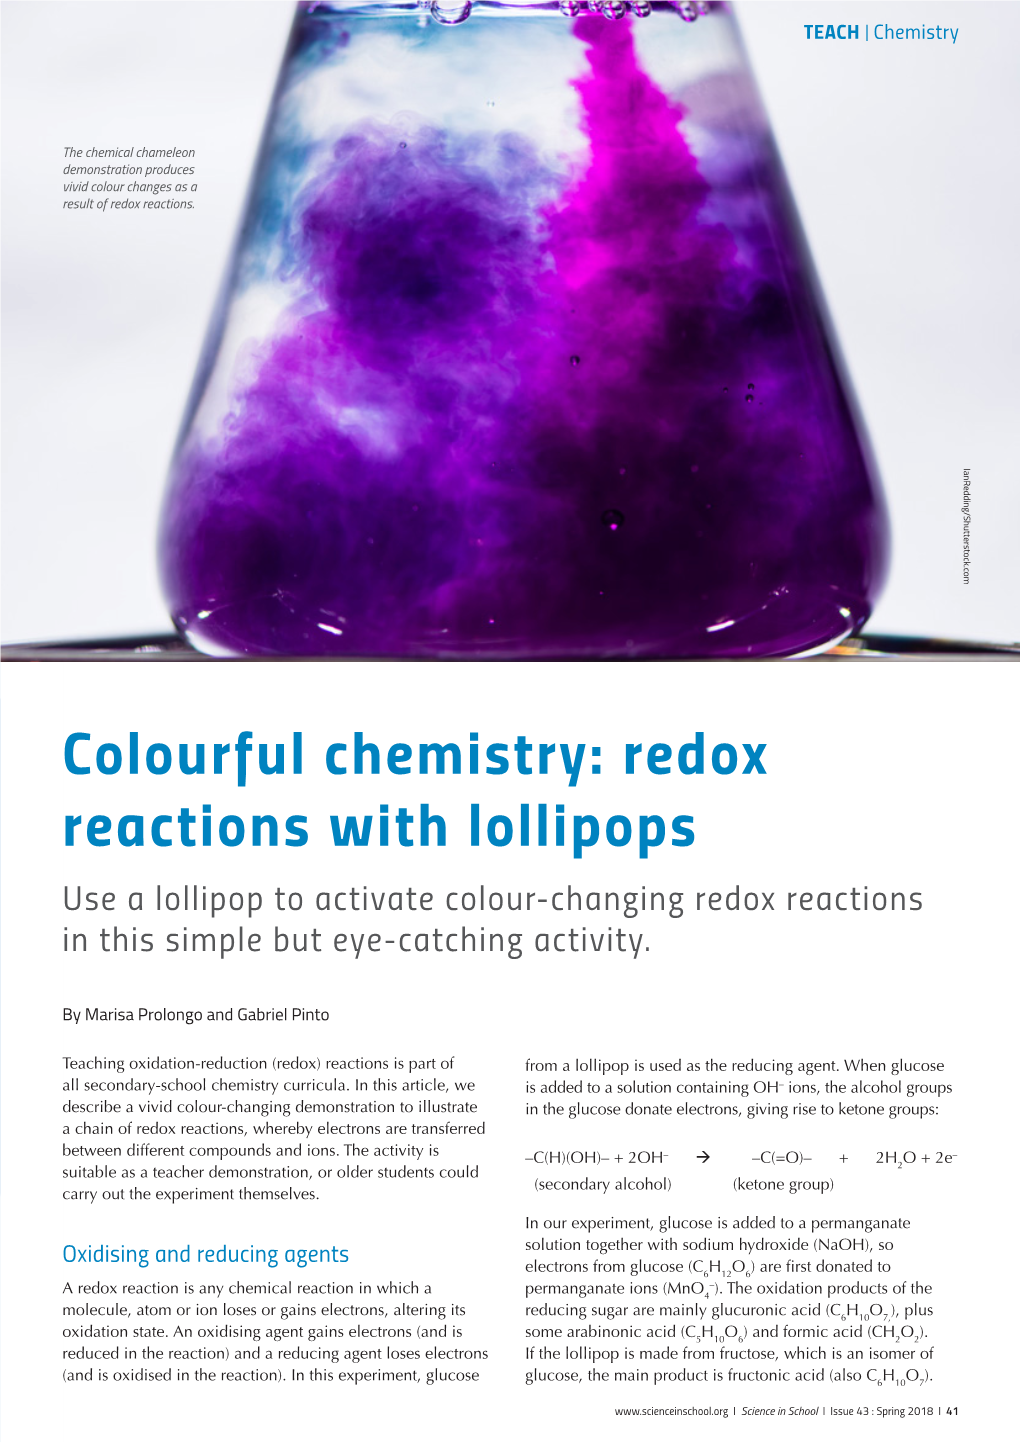 Redox Reactions with Lollipops Use a Lollipop to Activate Colour-Changing Redox Reactions in This Simple but Eye-Catching Activity